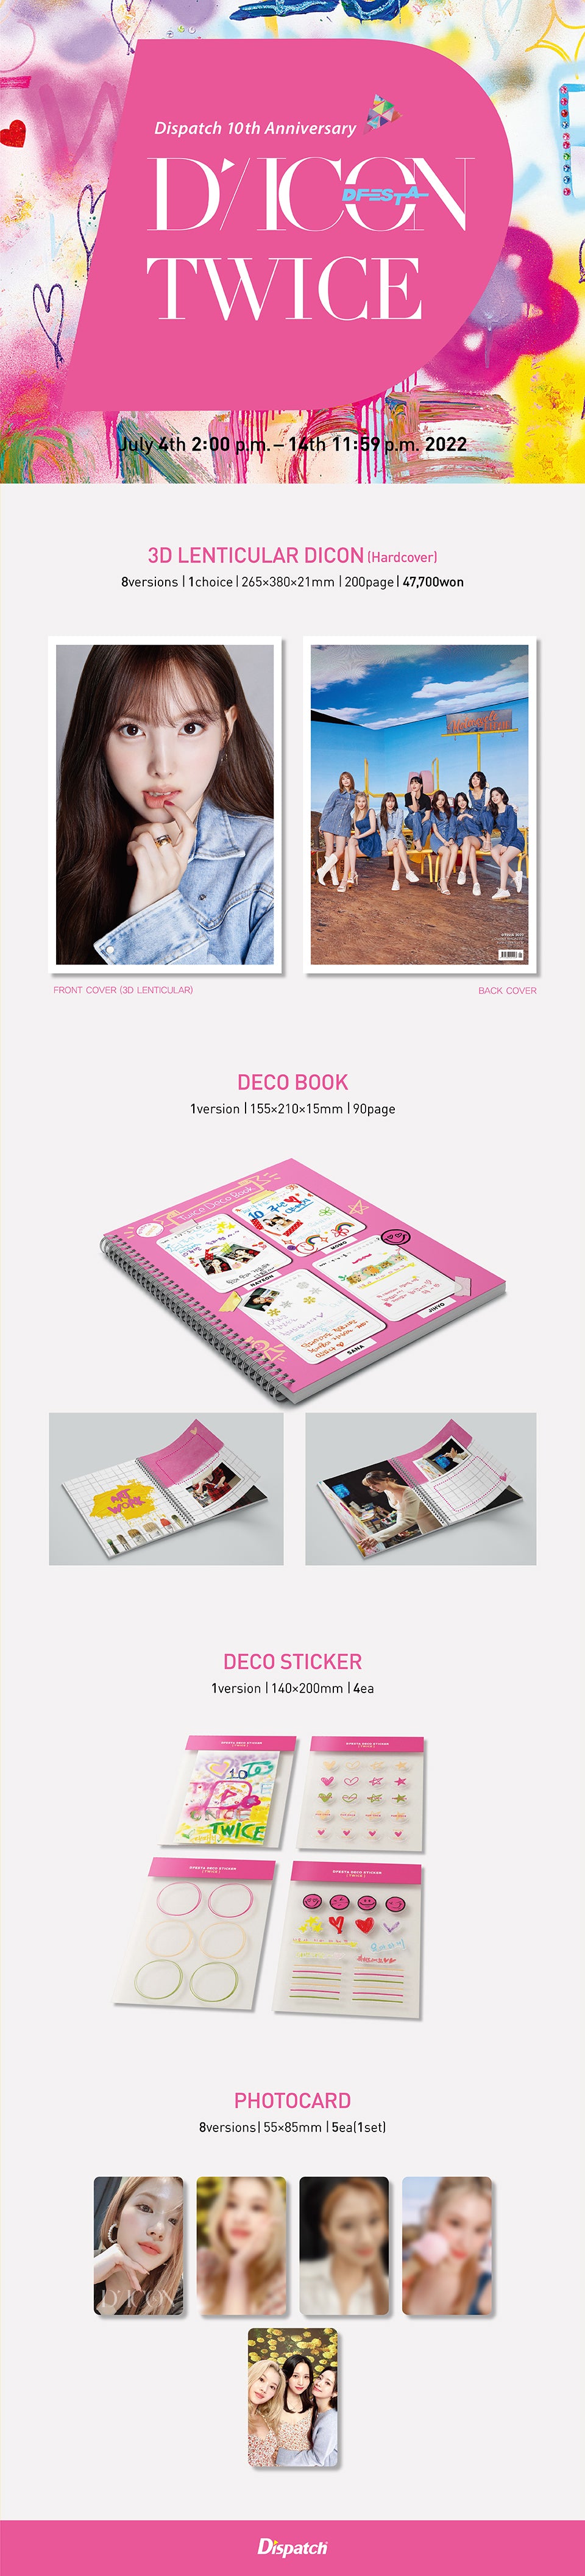 3D Lenticular DICON (200 pages)
1 Deco Book (90 pages)
4 Deco Stickers
5 Photo Cards